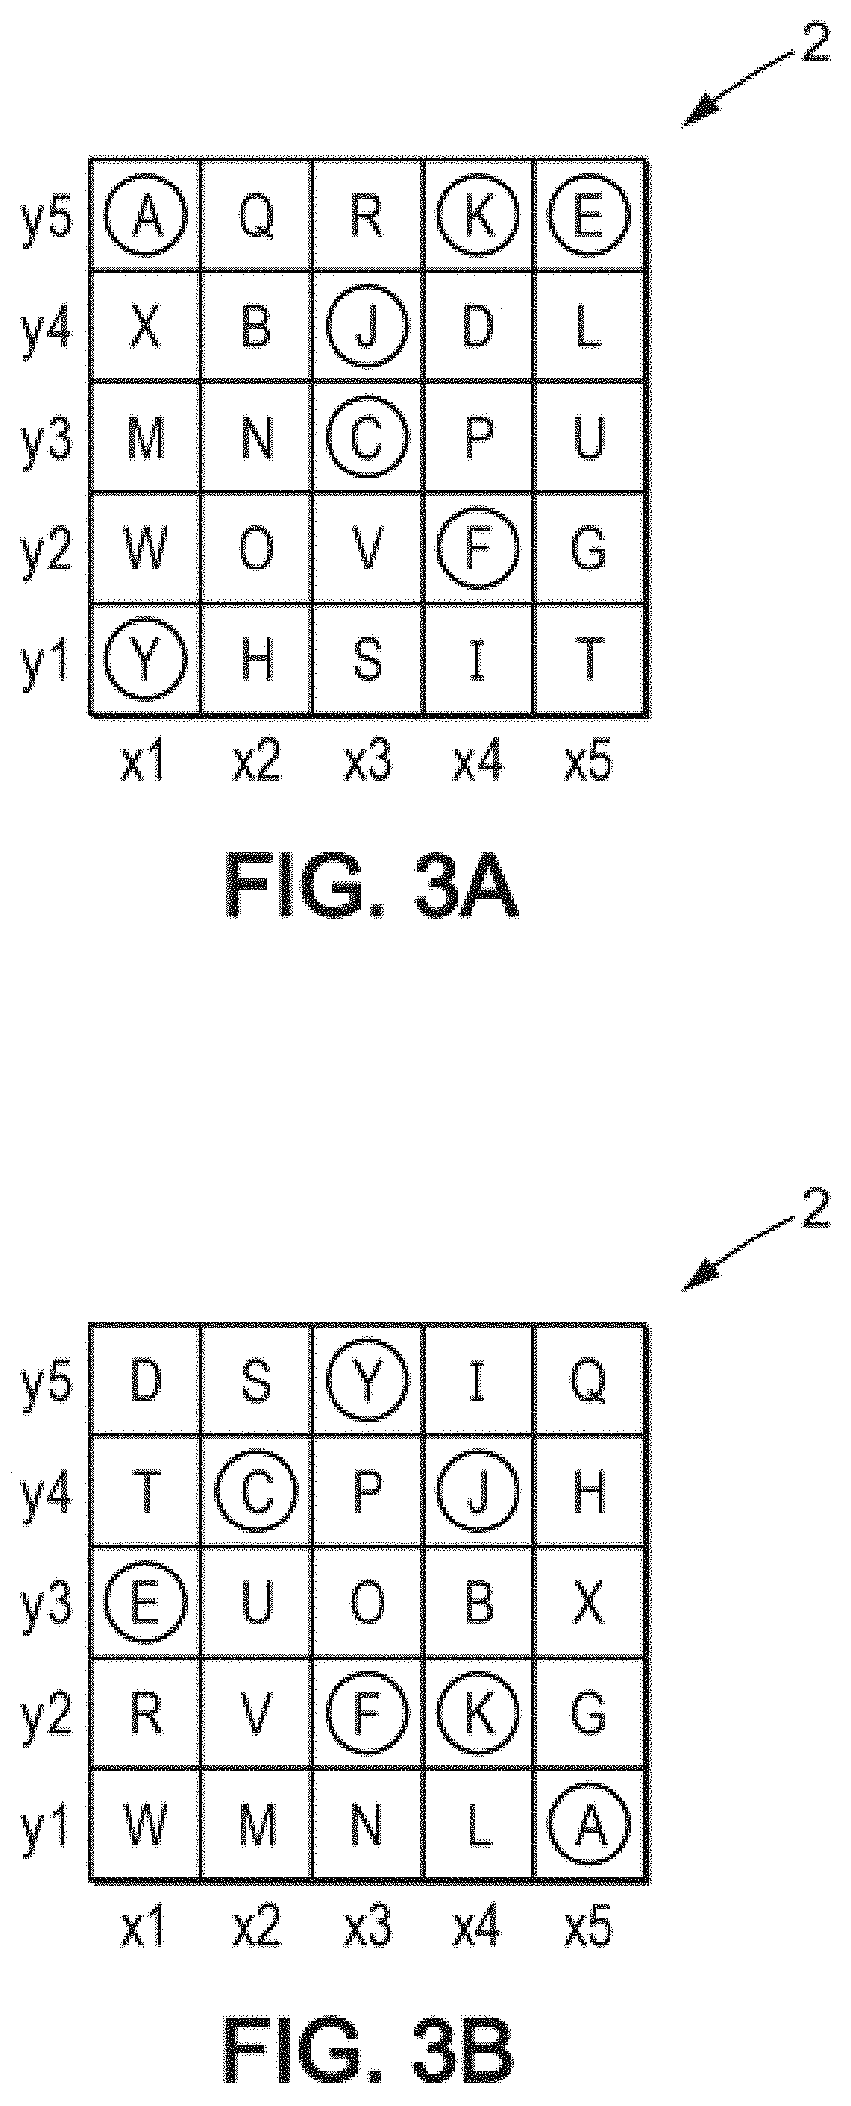 Method for authenticating a user by user identifier and associated graphical password